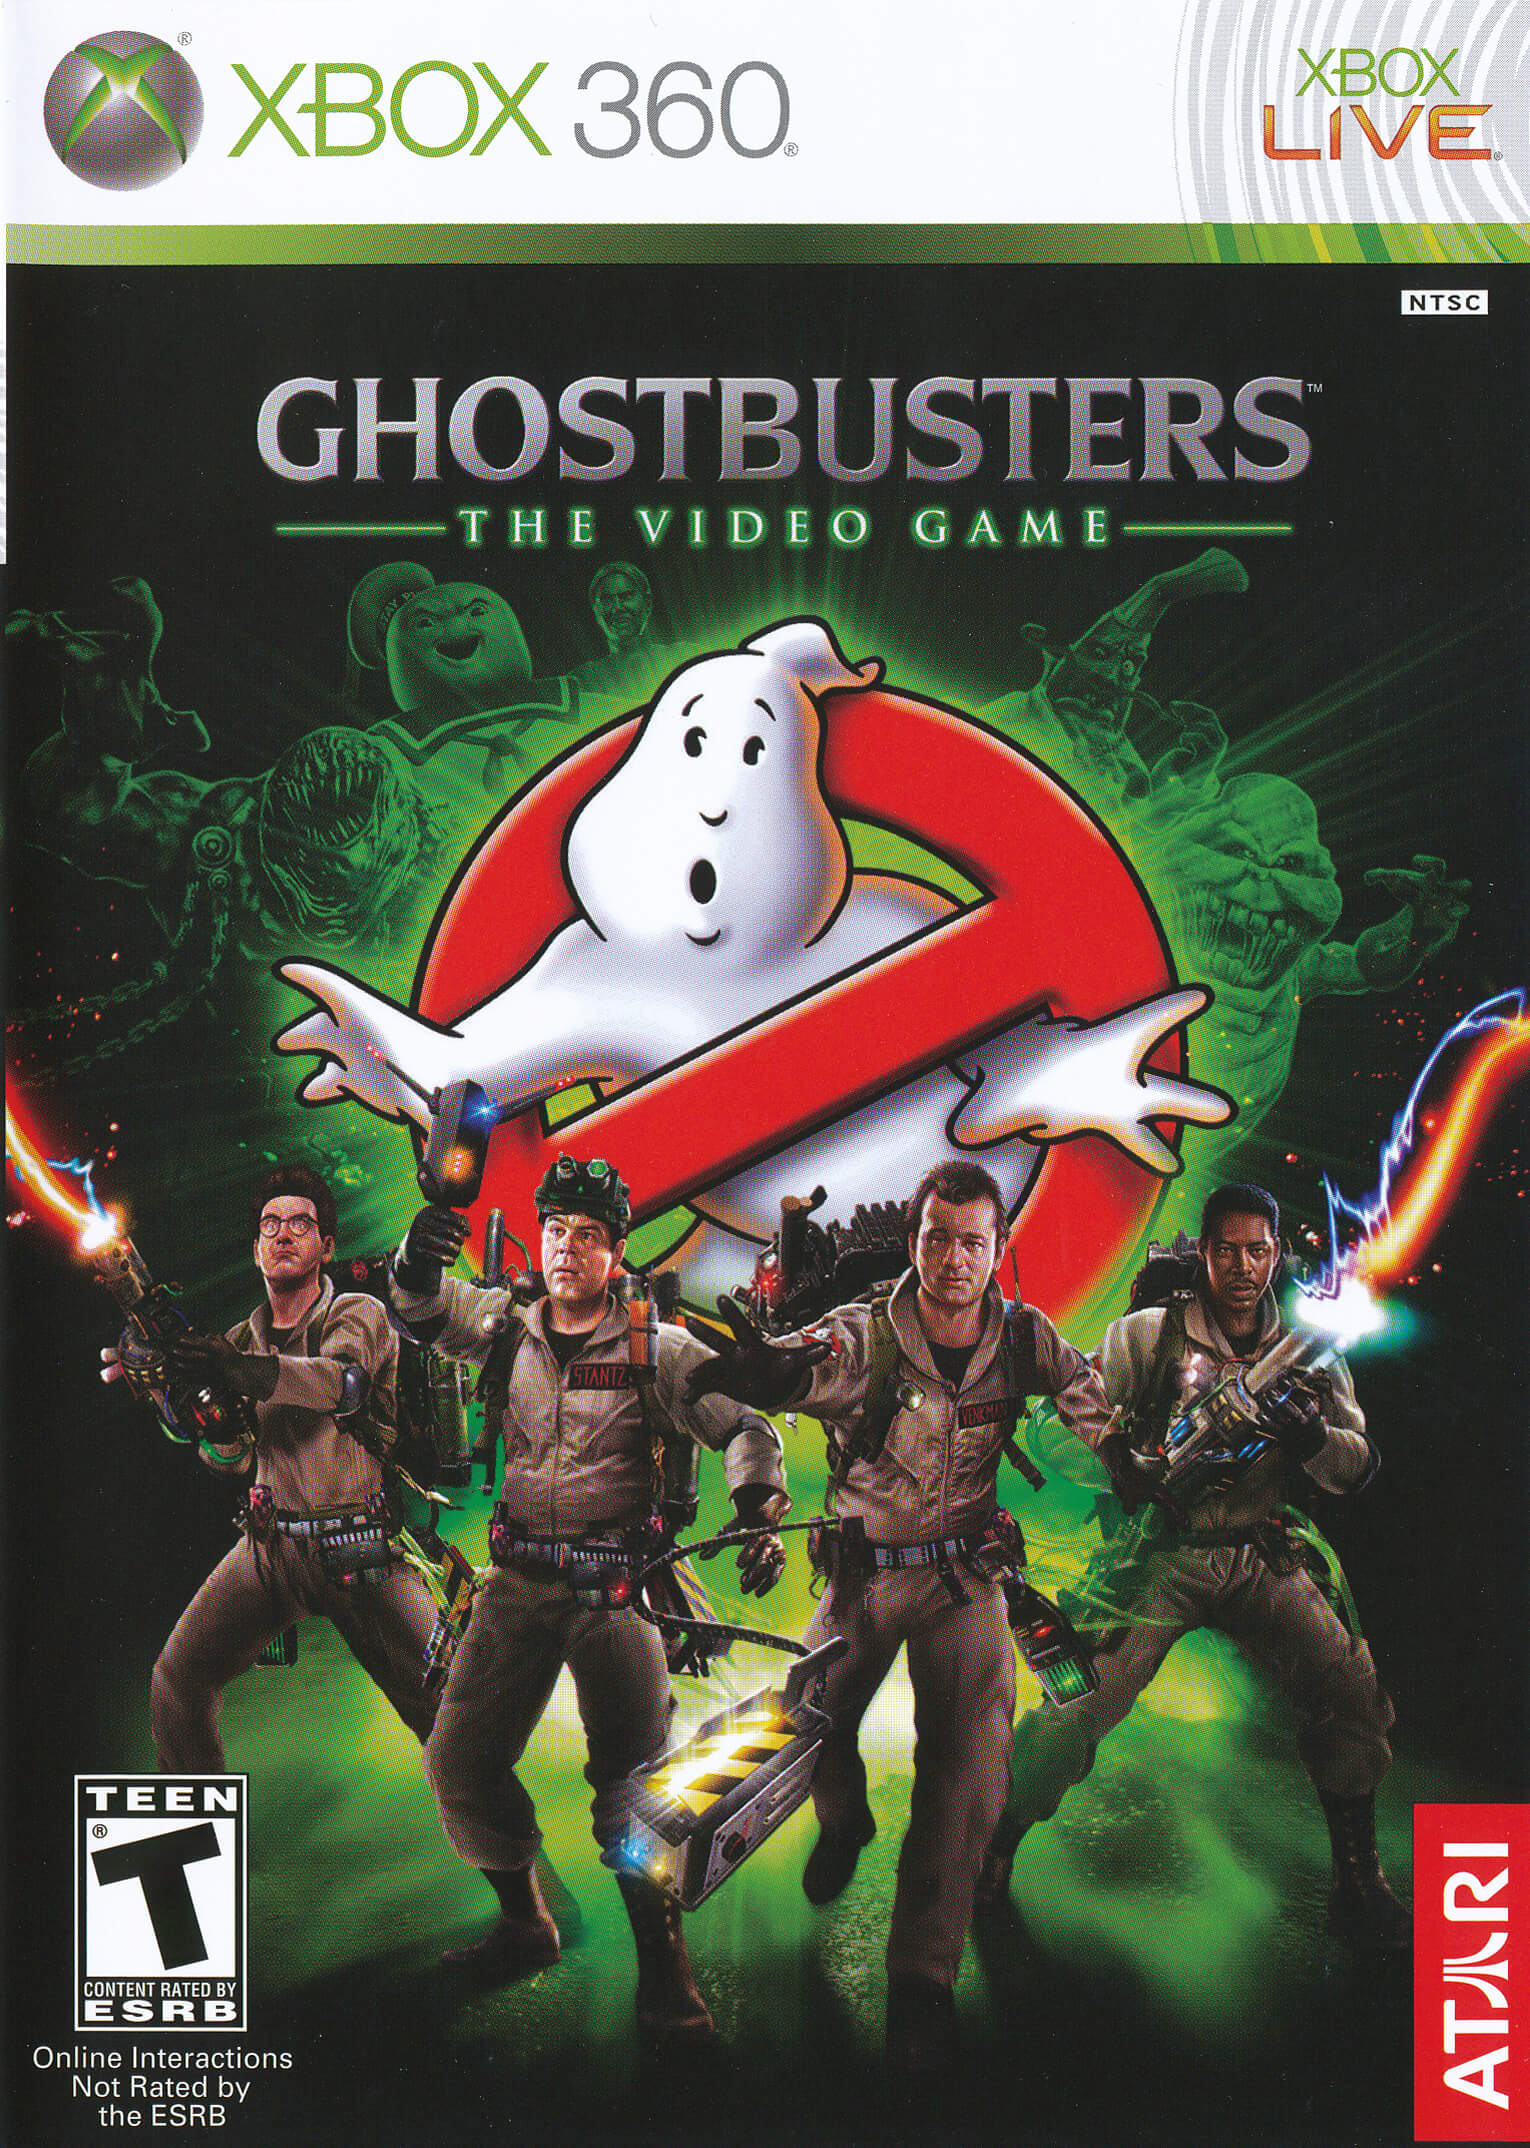 Ghostbusters: The Video Game (Xbox 360) Lt + 3.0